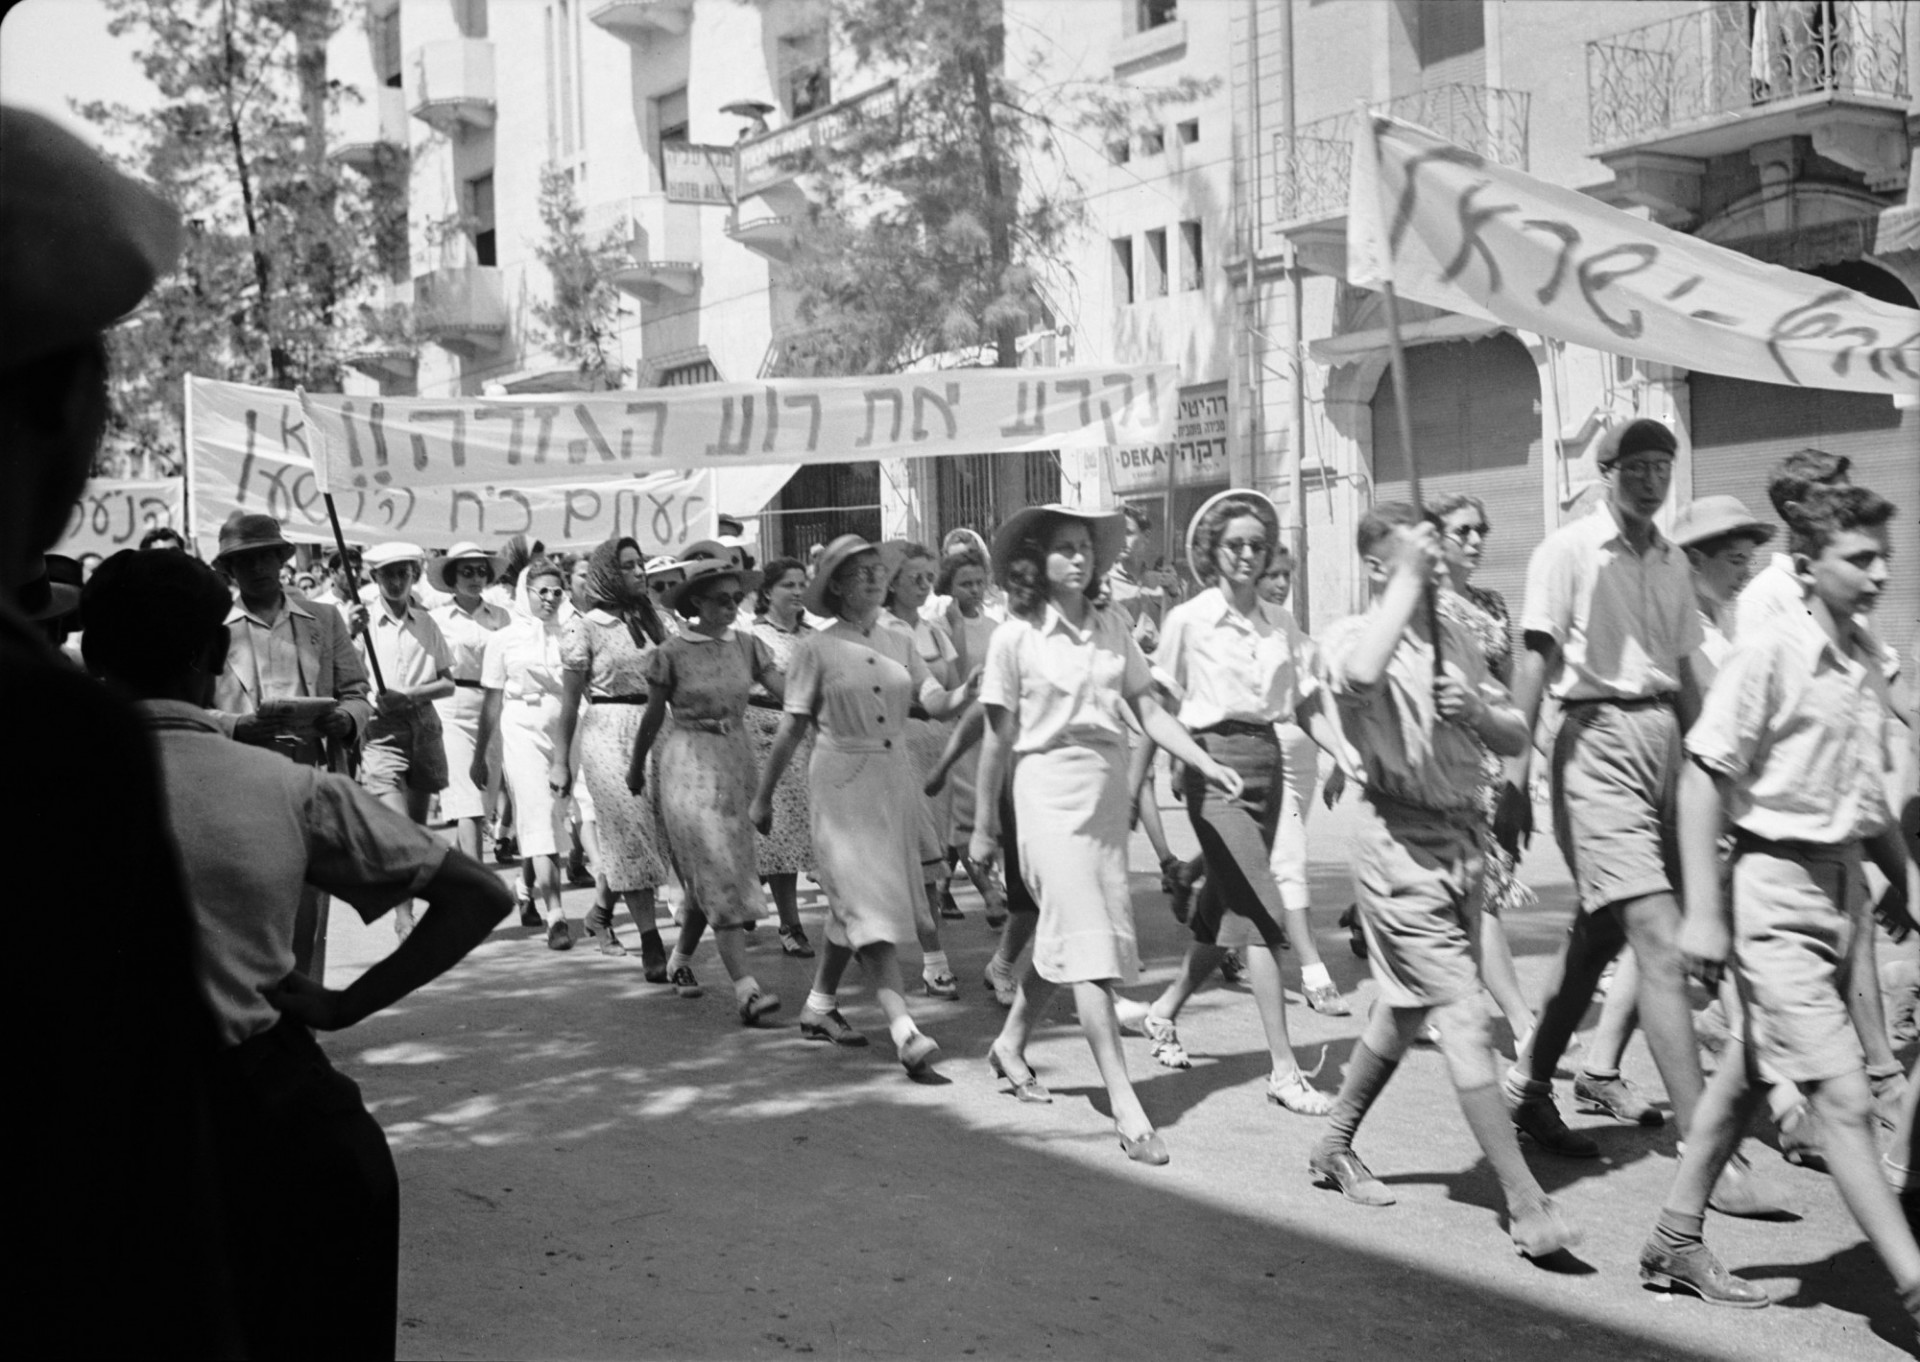 Jewish protest demonstrations in Mandatory Palestine, May 18, 1939. Source: Library of Congress, via Wikimedia Commons. Public domain.